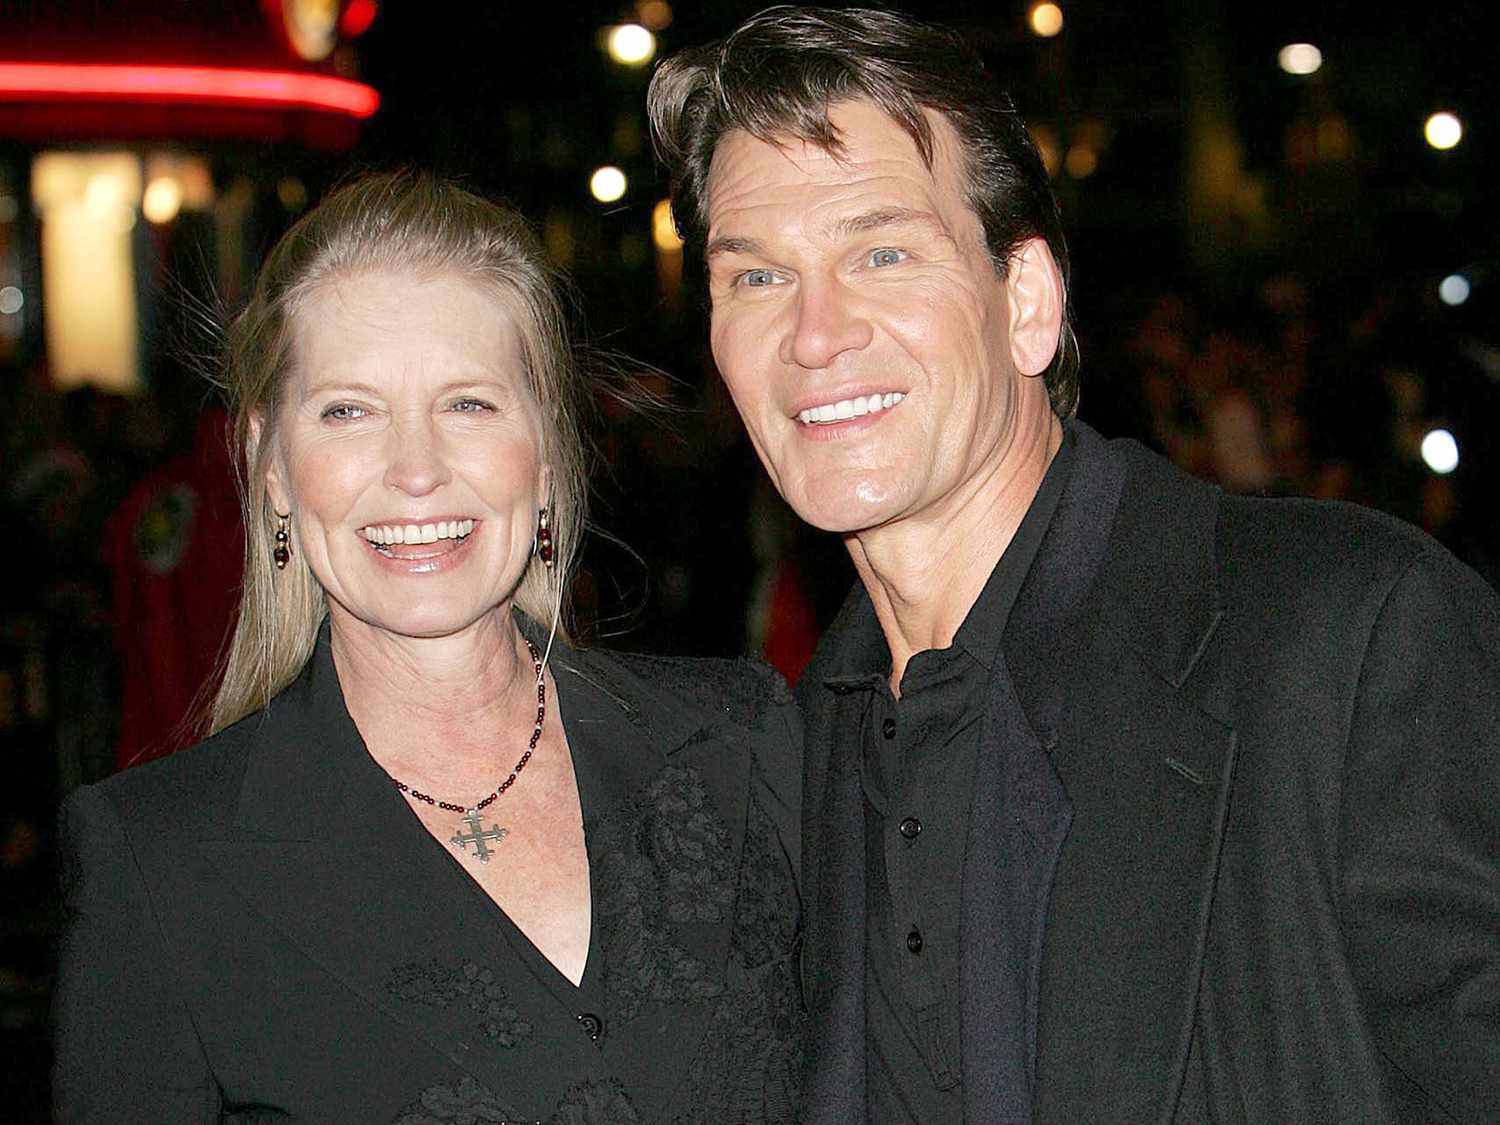 Patrick Swayze’s Widow Watches His Movies When She Misses Him [Video]